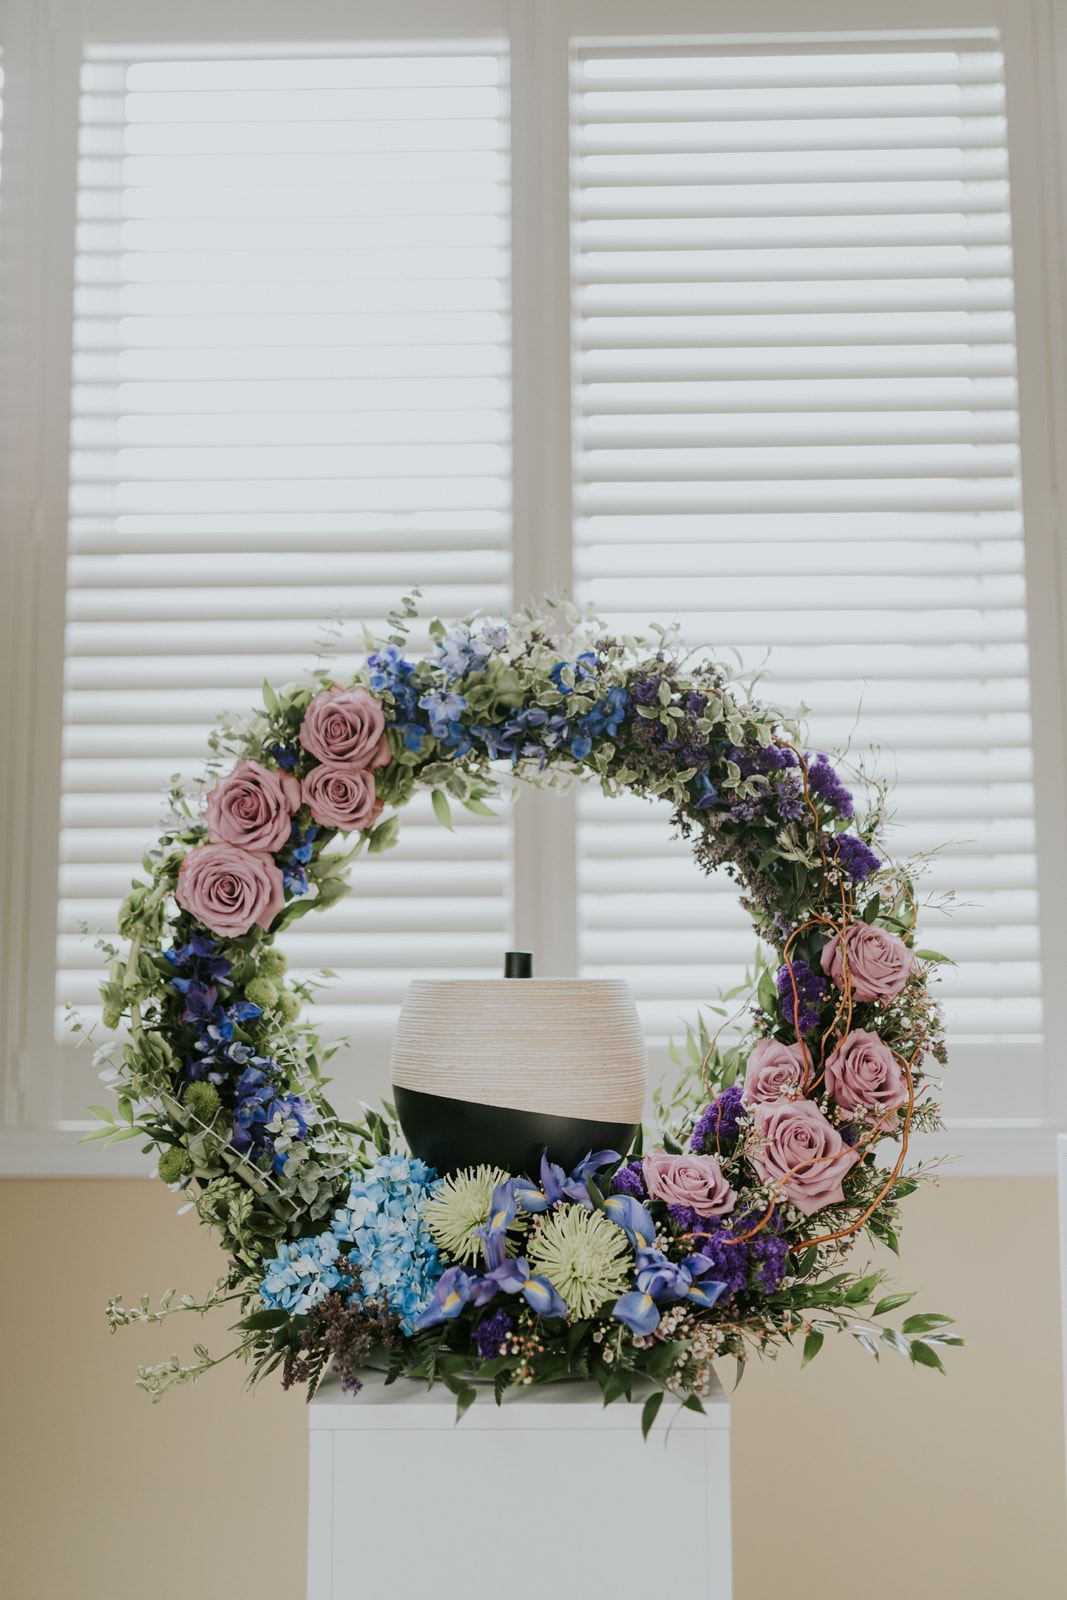  The Tranquil Gate Collection picks up on the soft tones of lavender and green and the bolder tones of royal blue and purple. The color of the blue hydrangea finds a space to tie the soft and bold together. The collection features a casket spray with